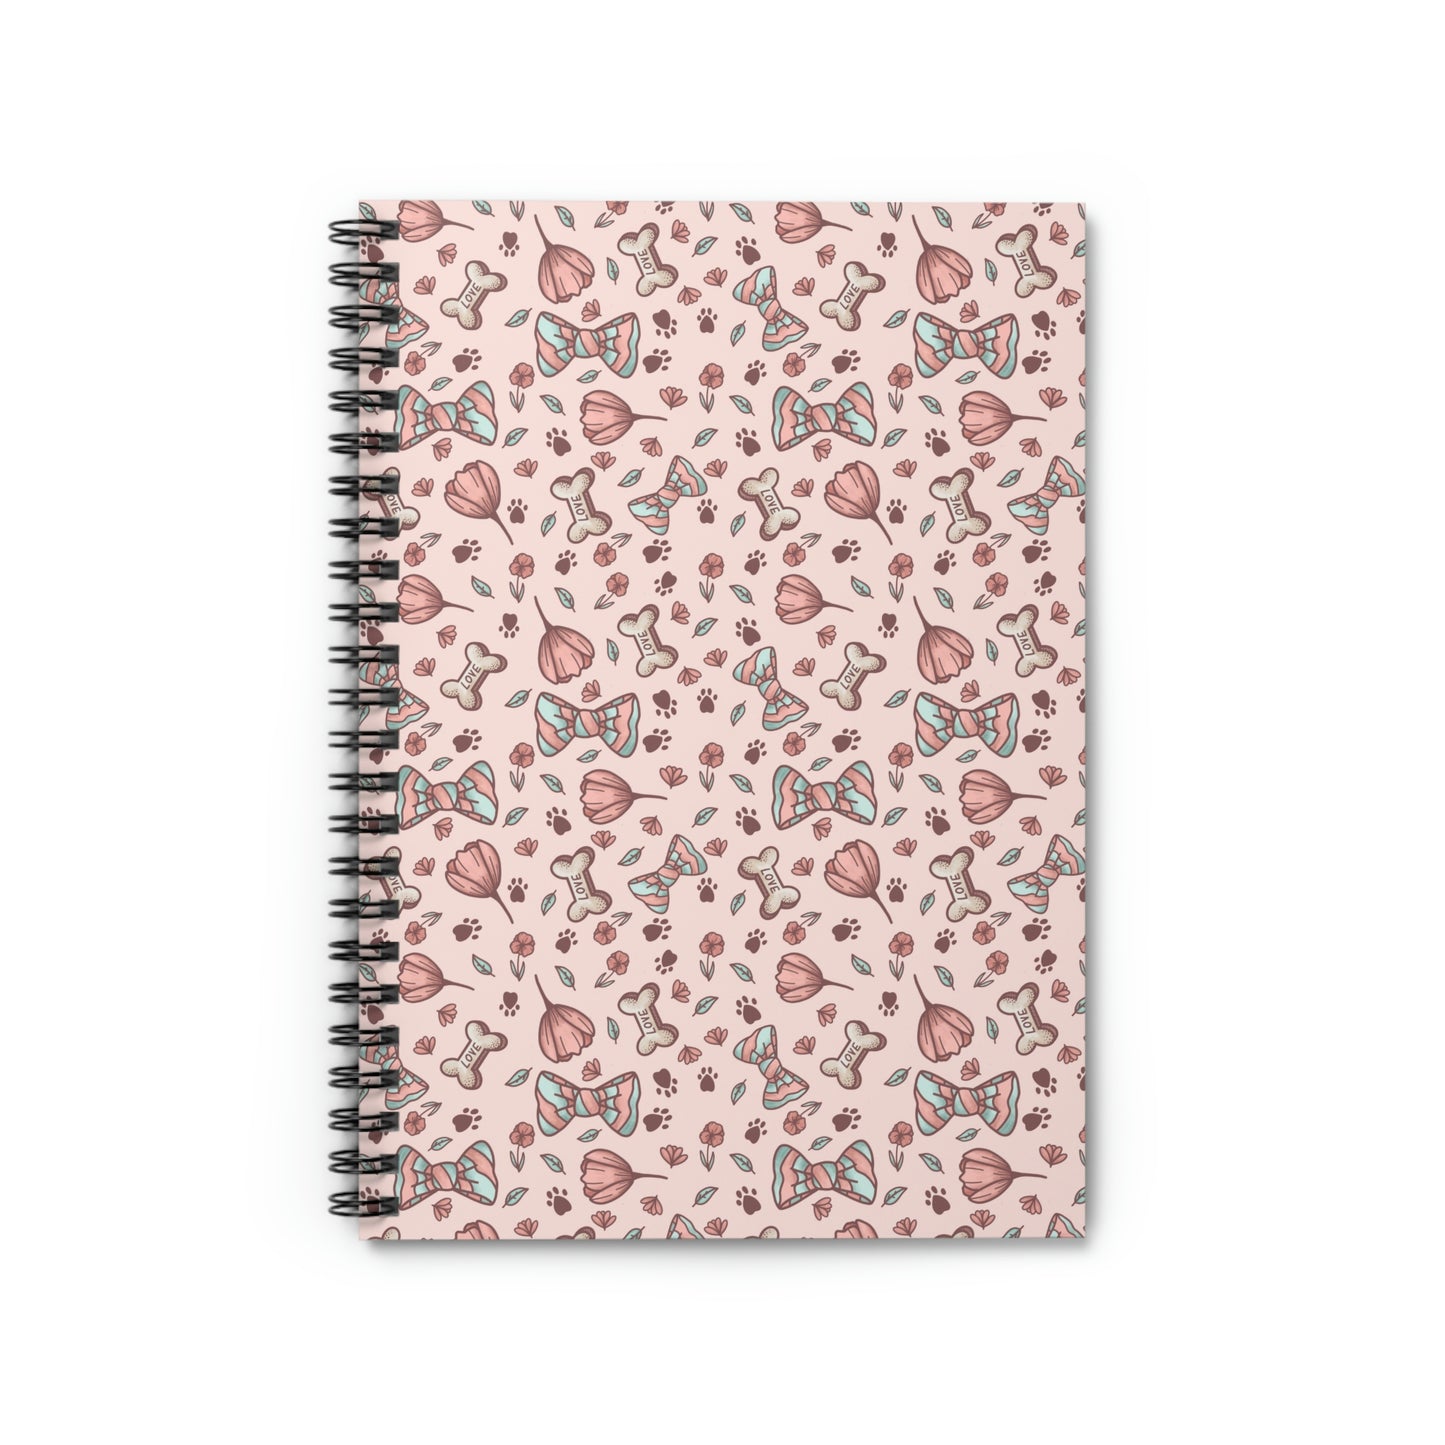 Bows & Tulip Spiral Notebook - Ruled Line